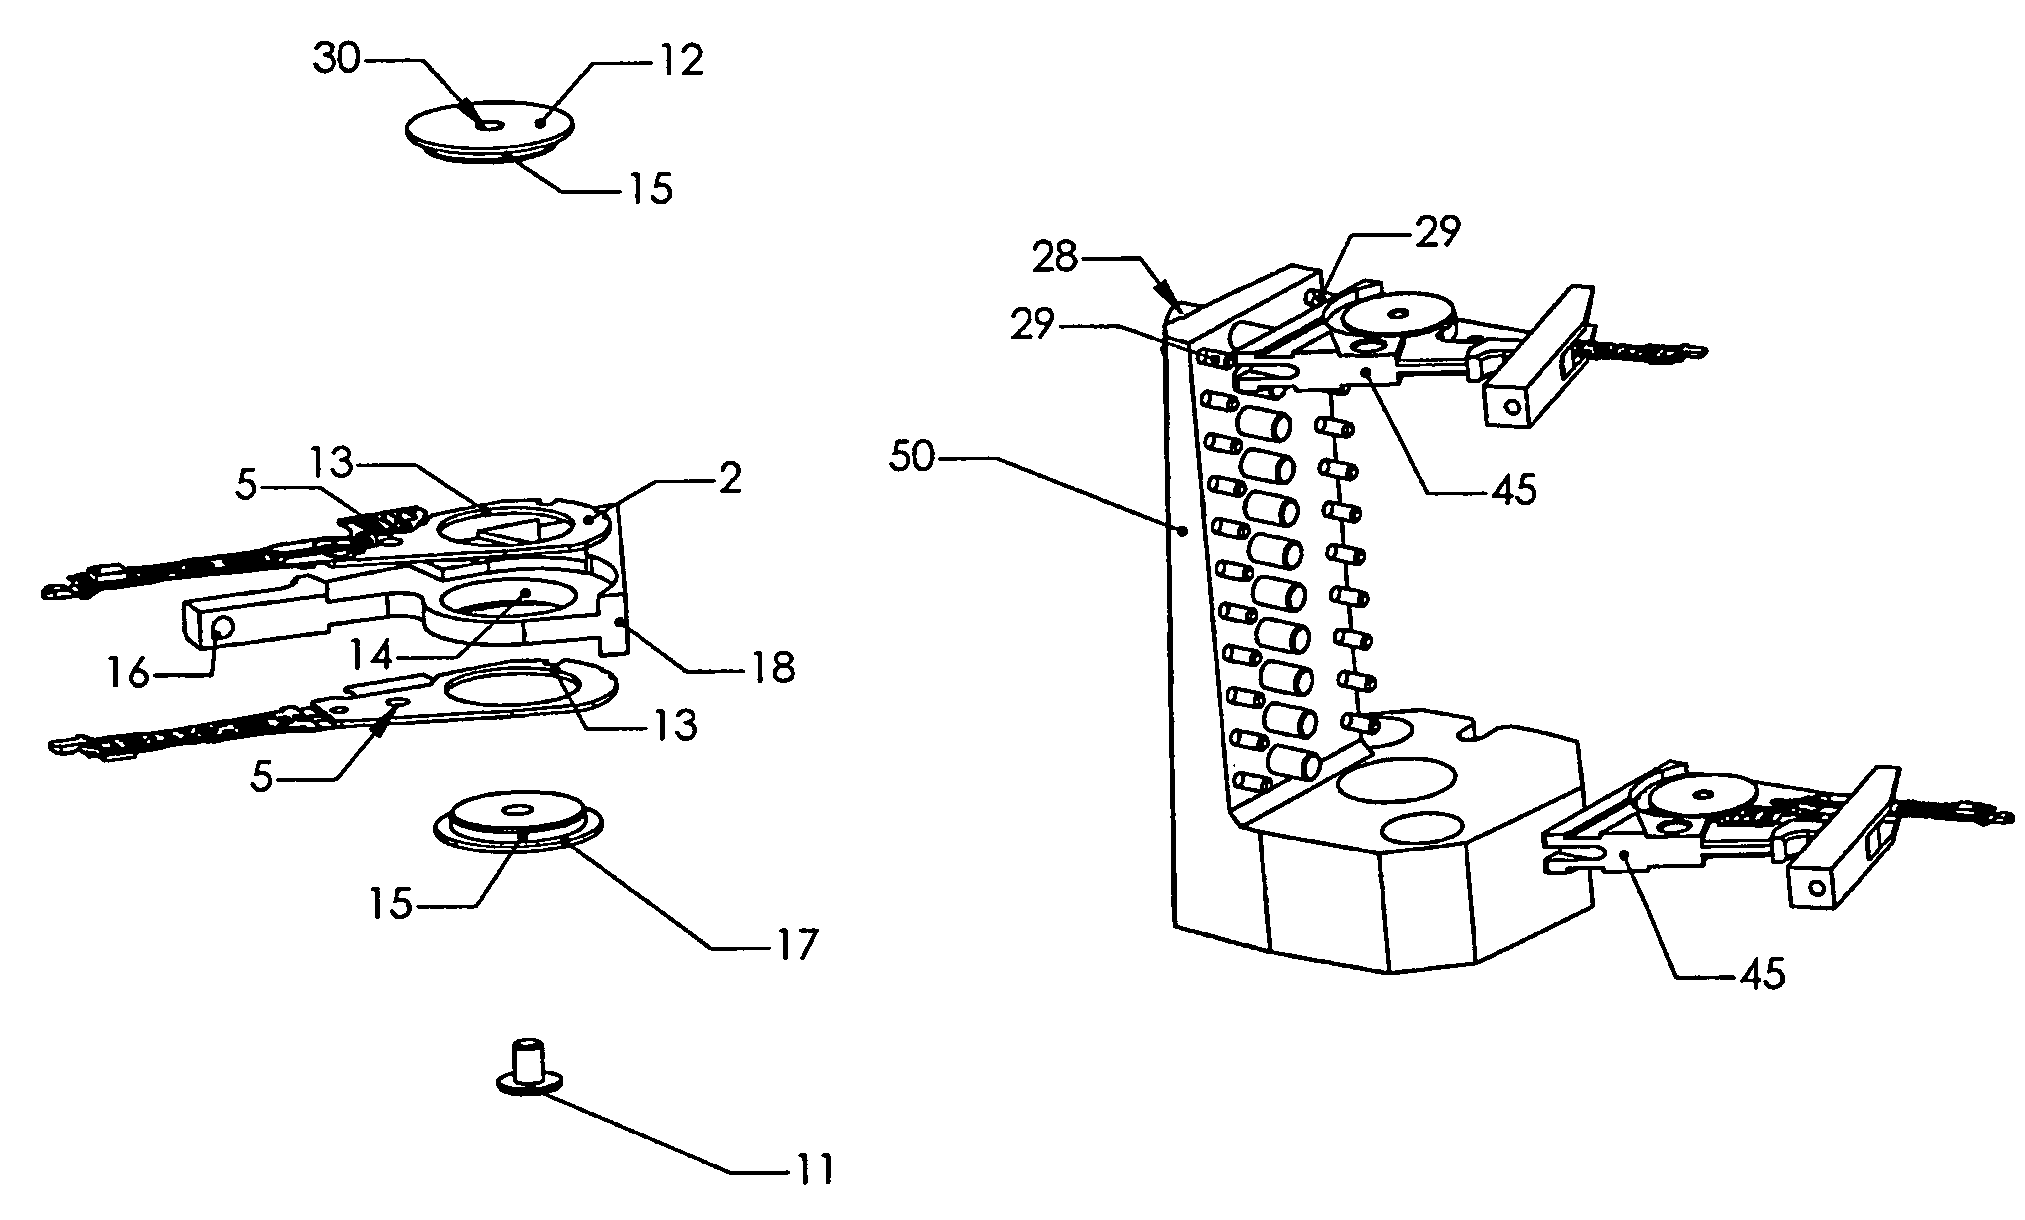 Head/arm subassembly and head stack assembly for media servowriter